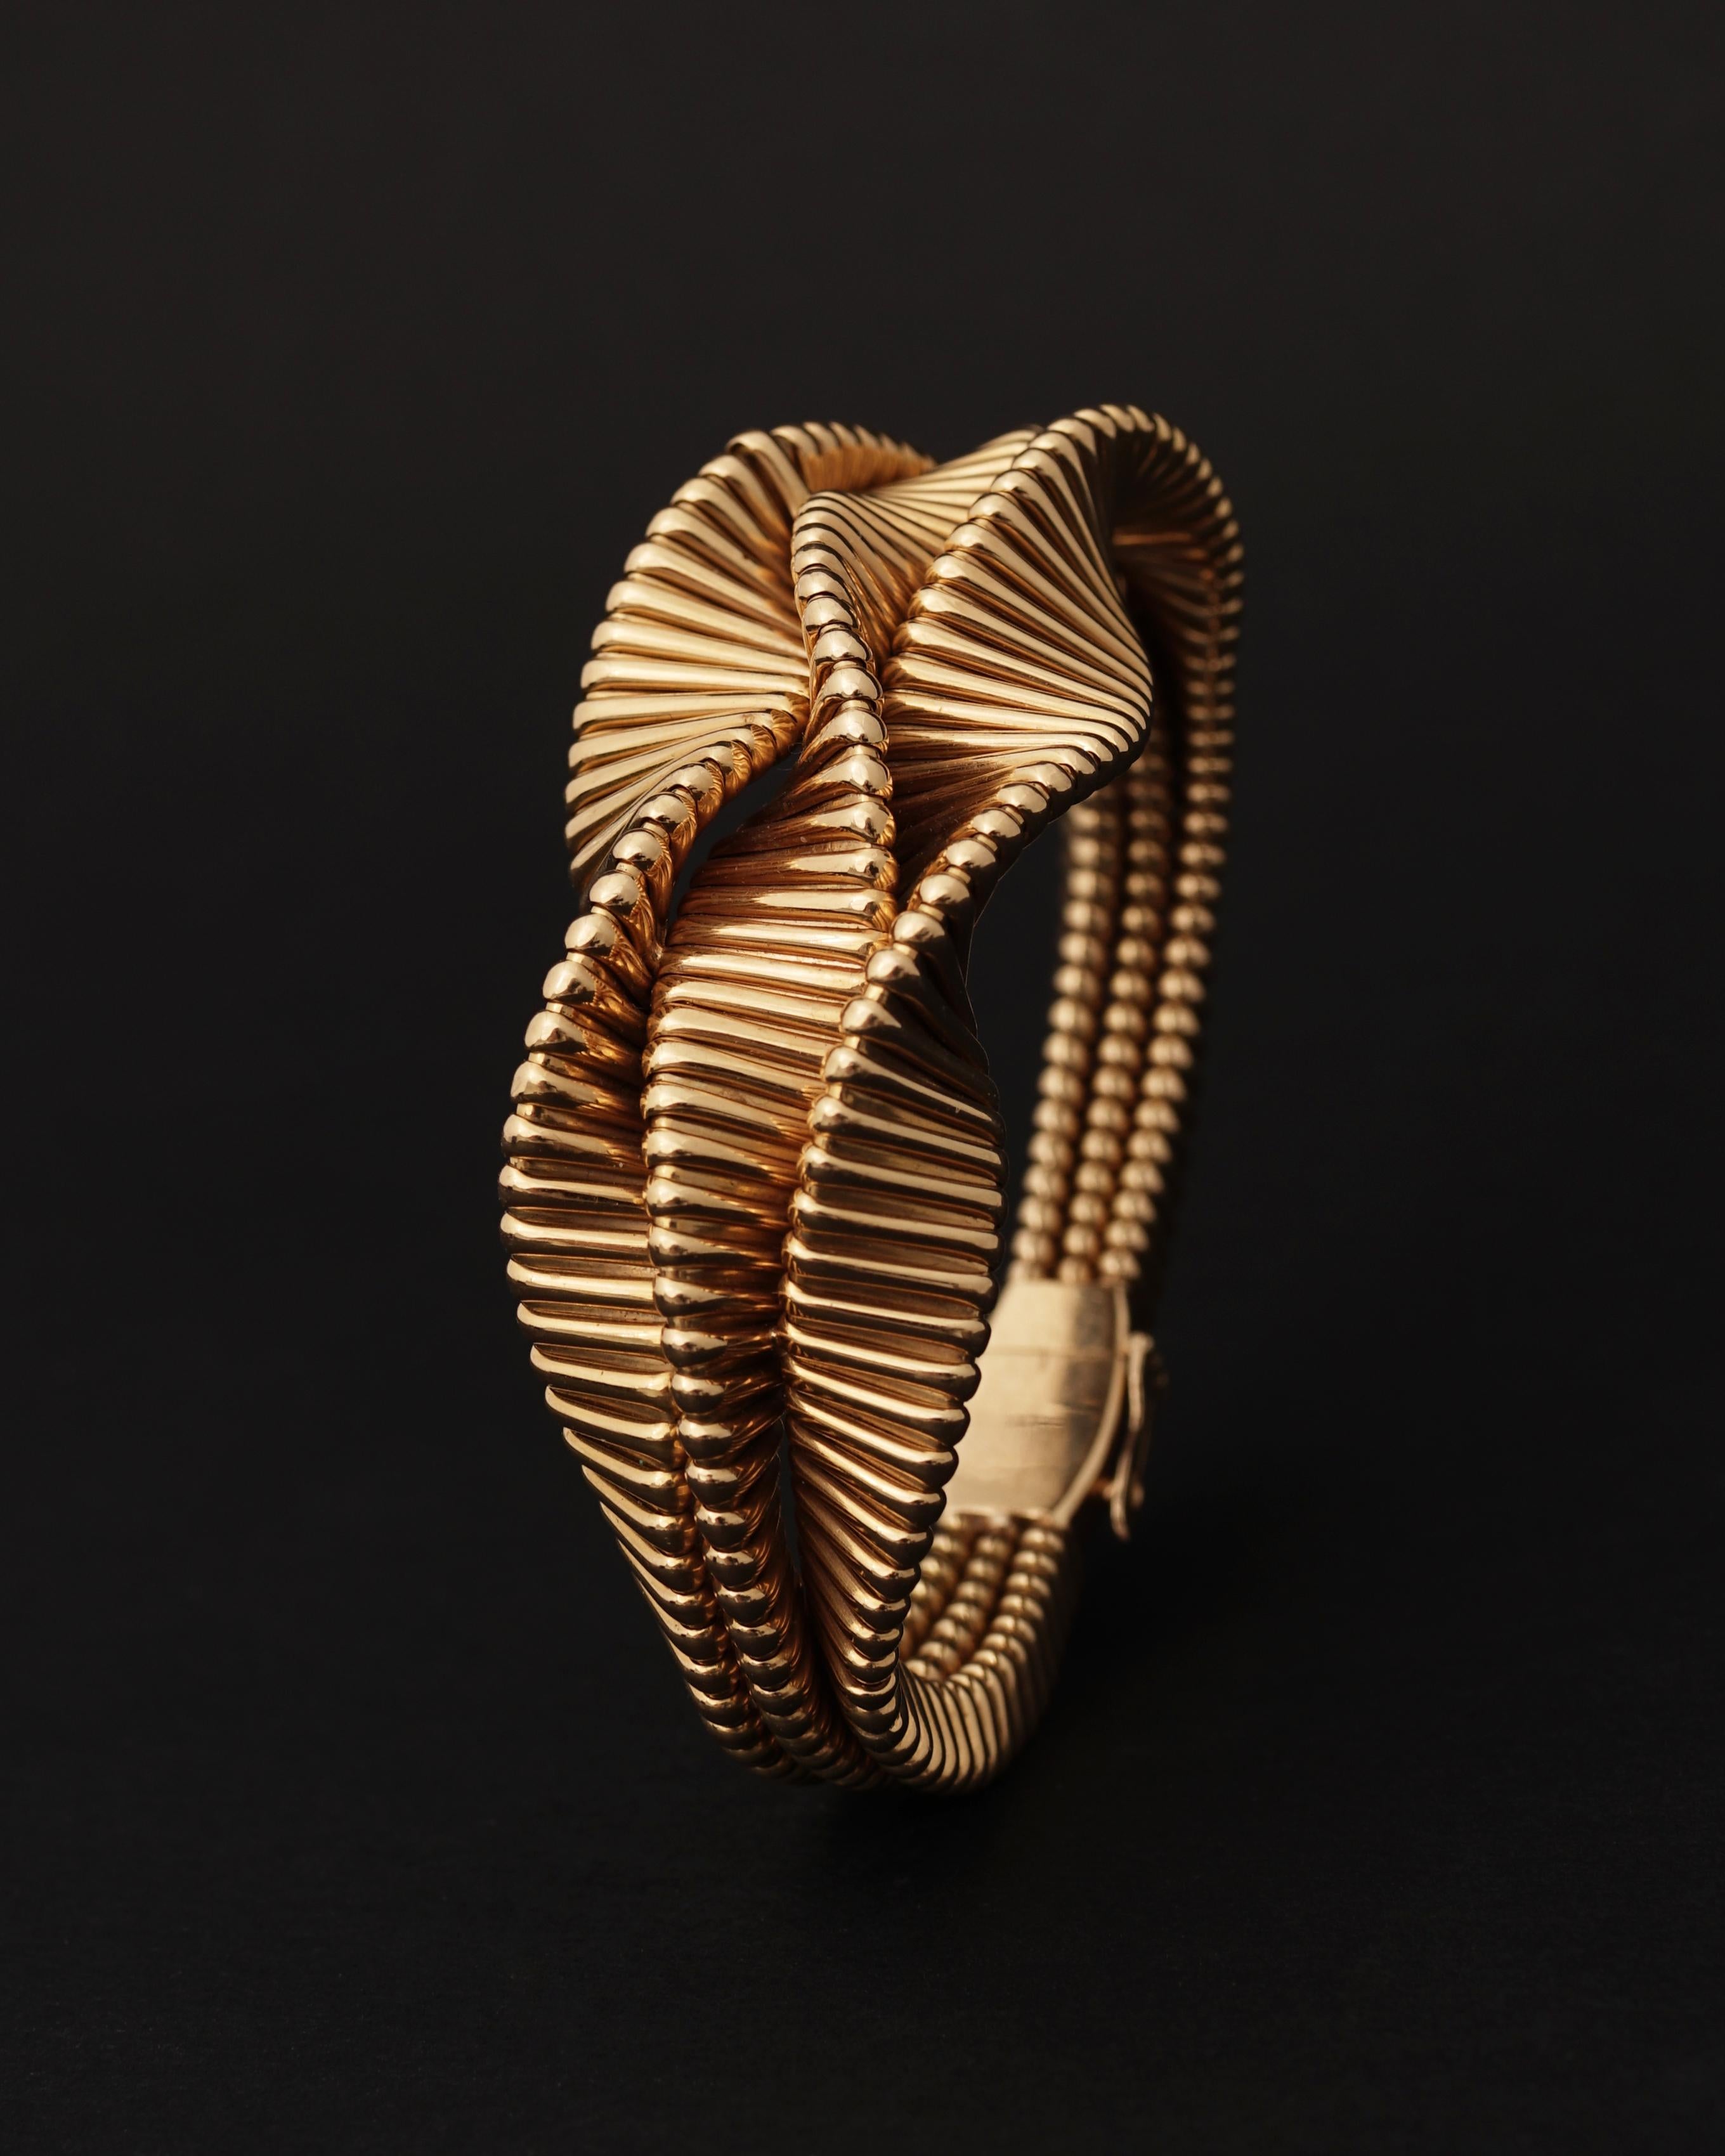 Attrib. Mauboussin
Twisted Tubogas Bracelet, Circa 1940
18K Gold, featuring 3 twisted tubogas bangles. size : 17,5cm
Wears the Maker's Mark 